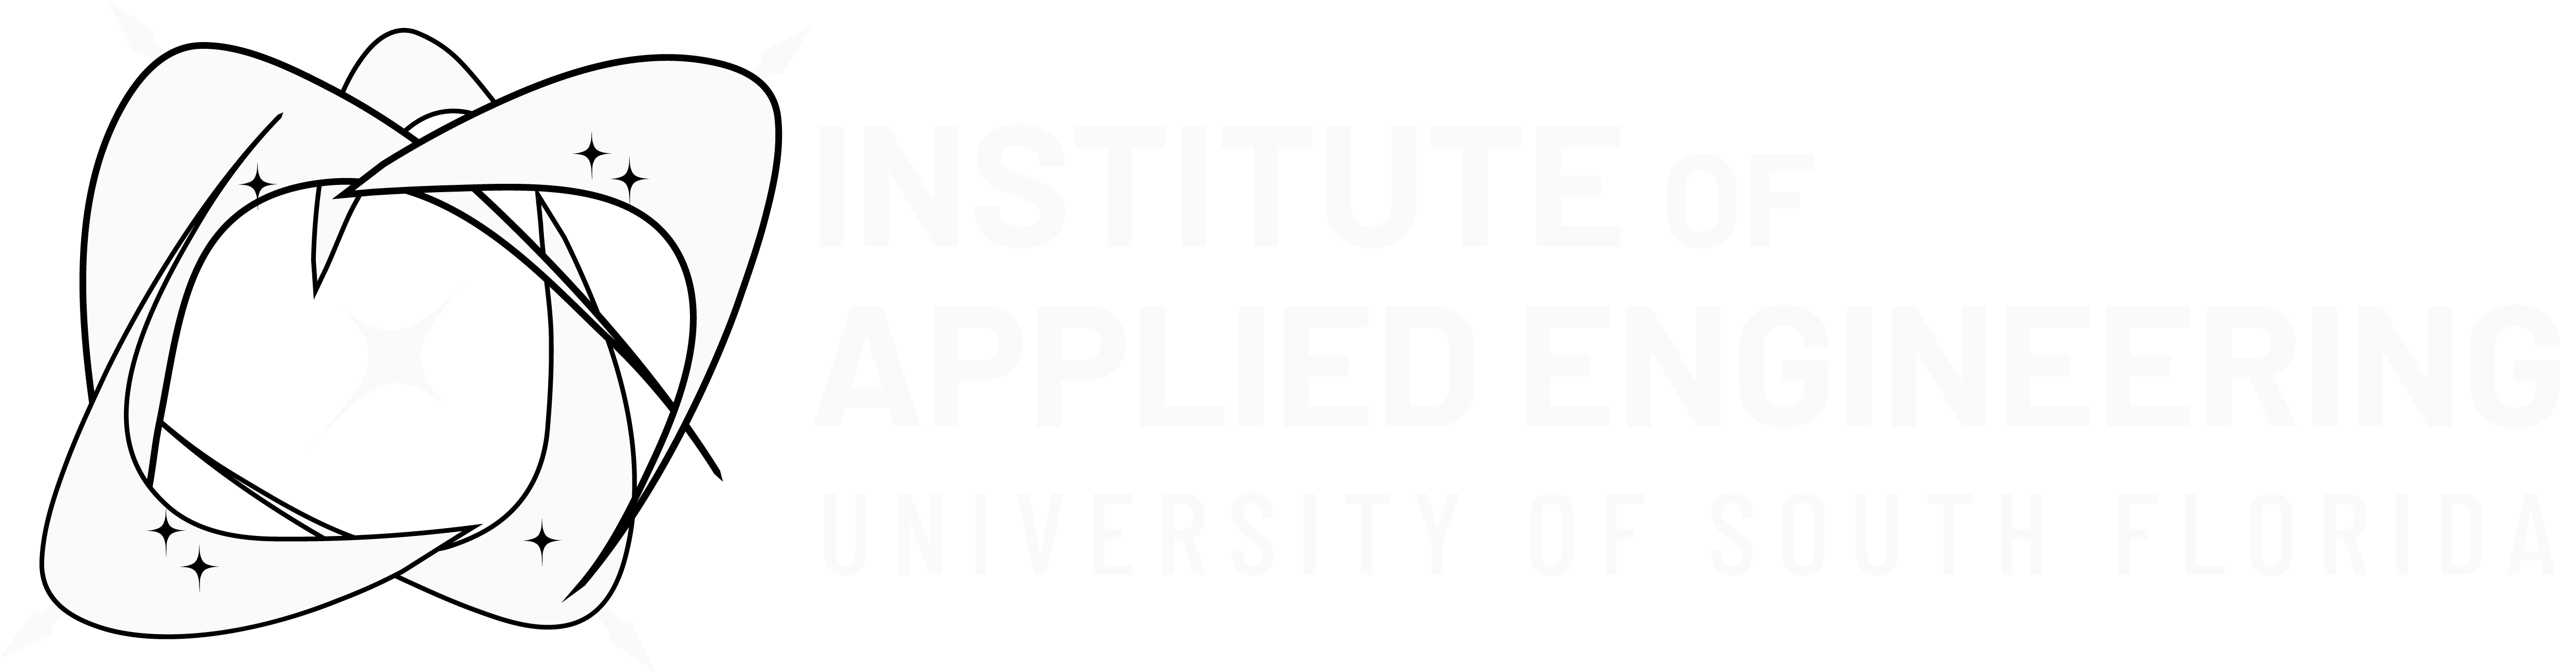 Green and gold logo. Institute of Applied Engineering, University of South Florida.